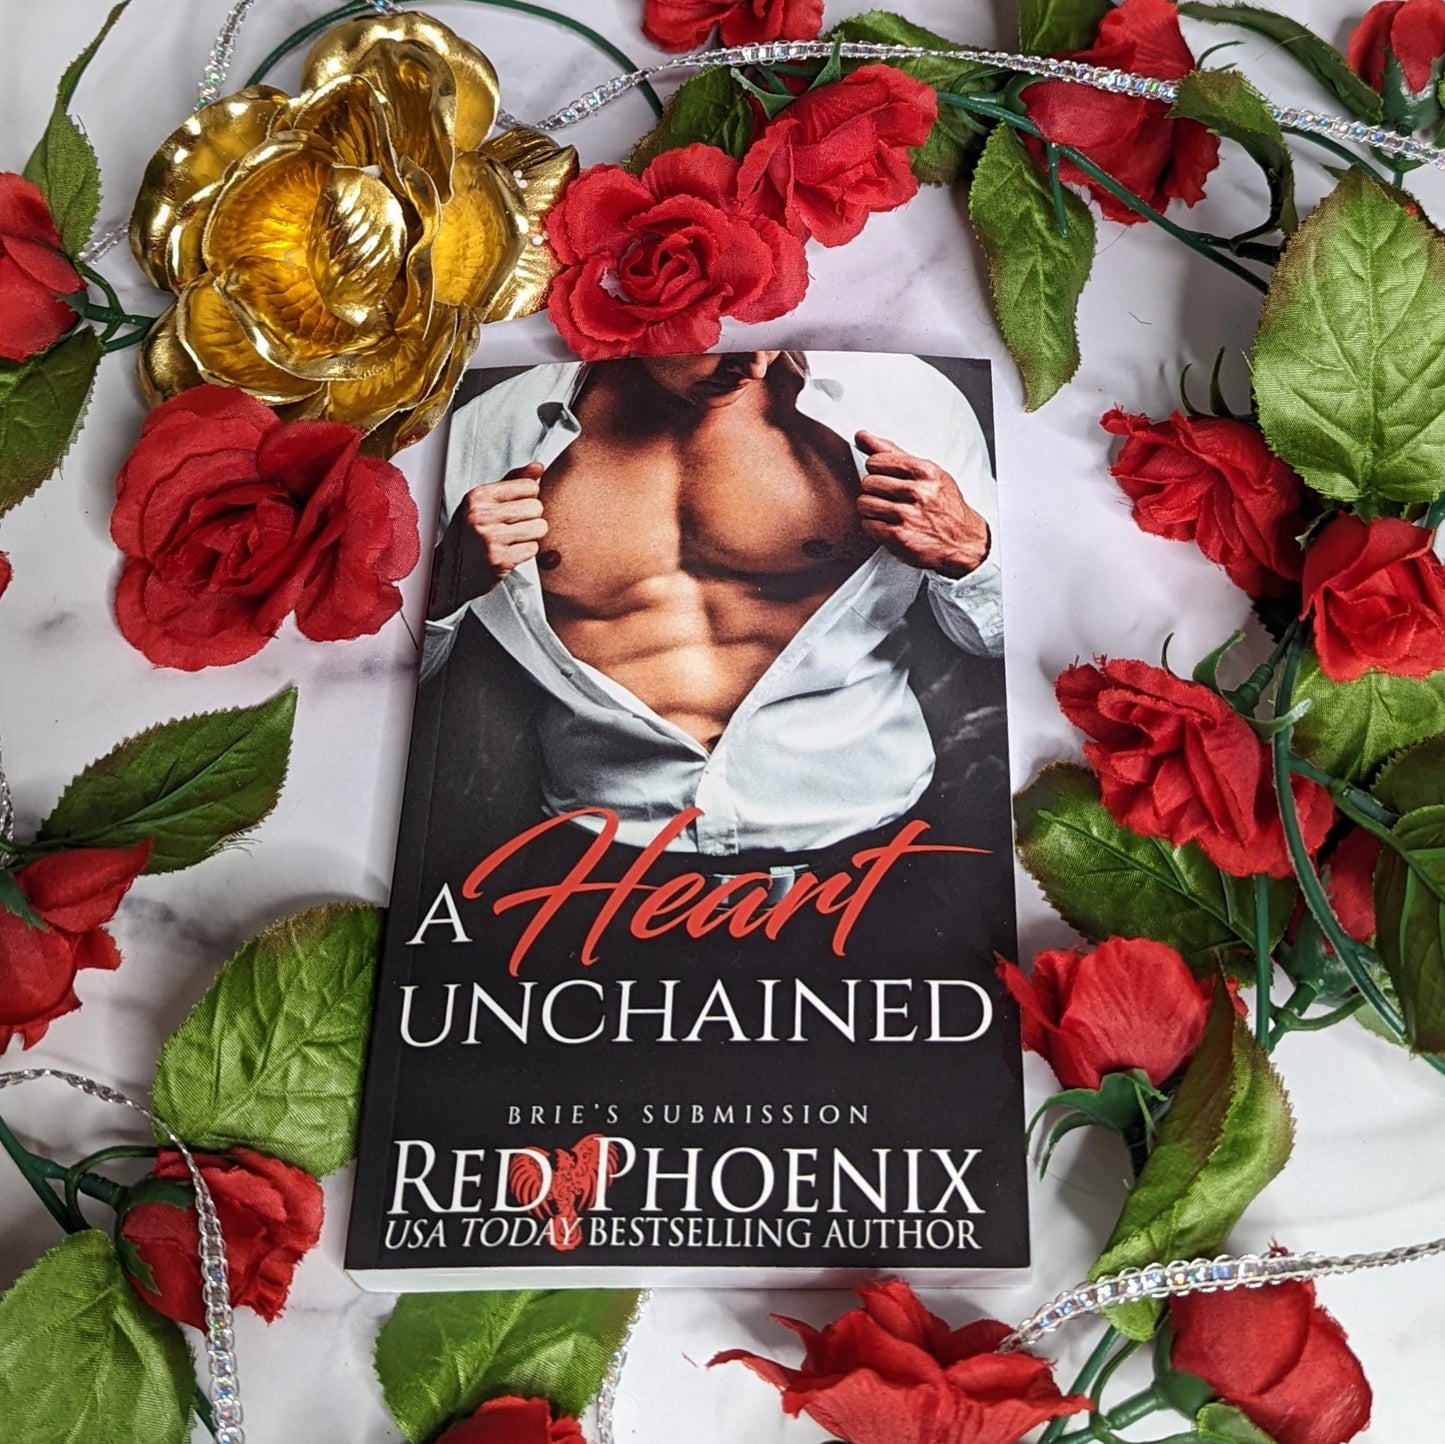 A Heart Unchained (Brie's Submission #23) Signed Book